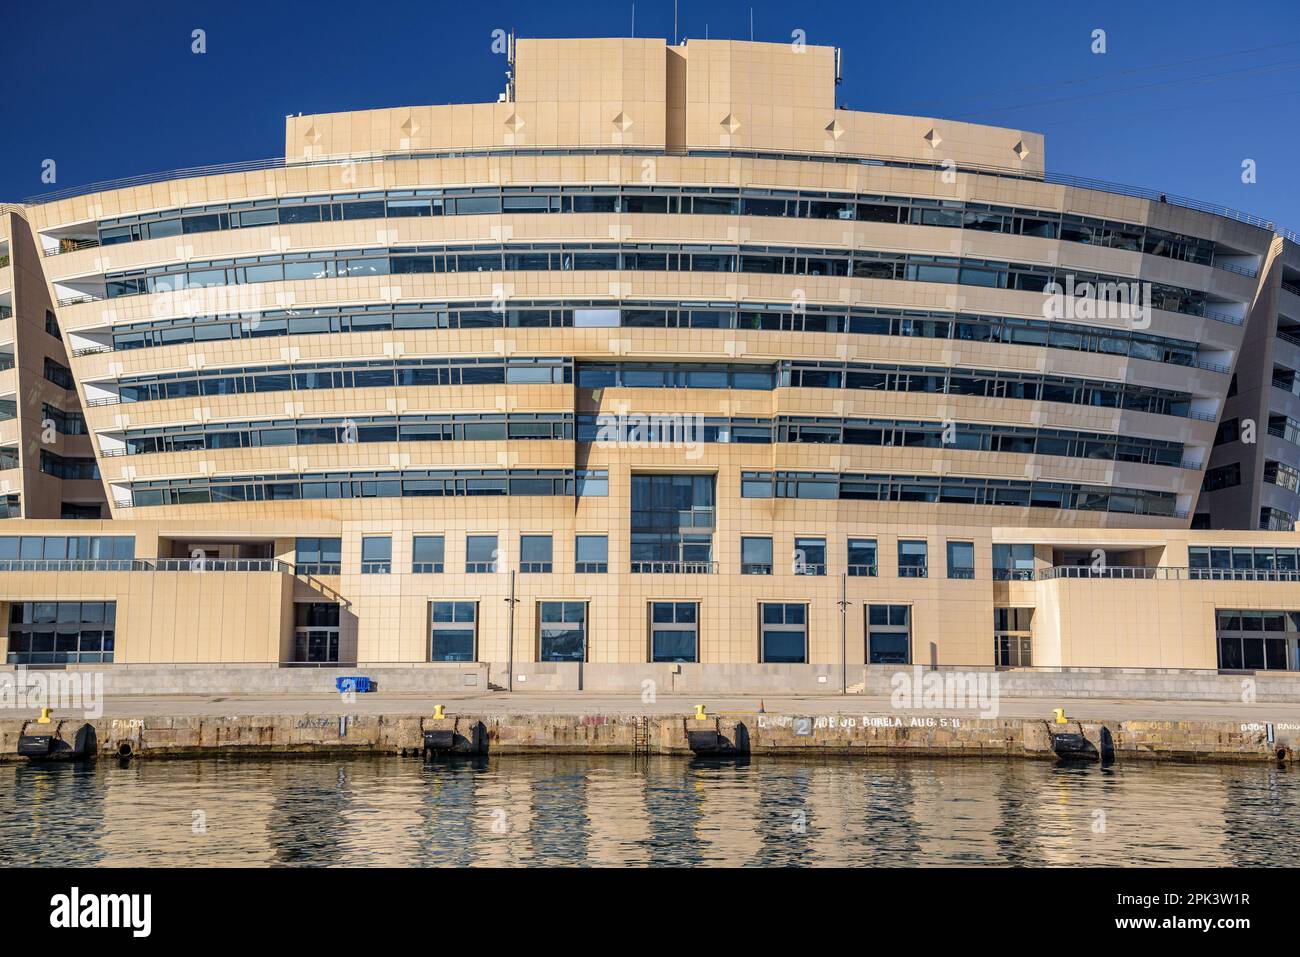 World Trade Center building in the Port Vell (old port) of Barcelona (Catalonia, Spain) ESP Edificio del World Trade Center en el Port Vell BCN España Stock Photo